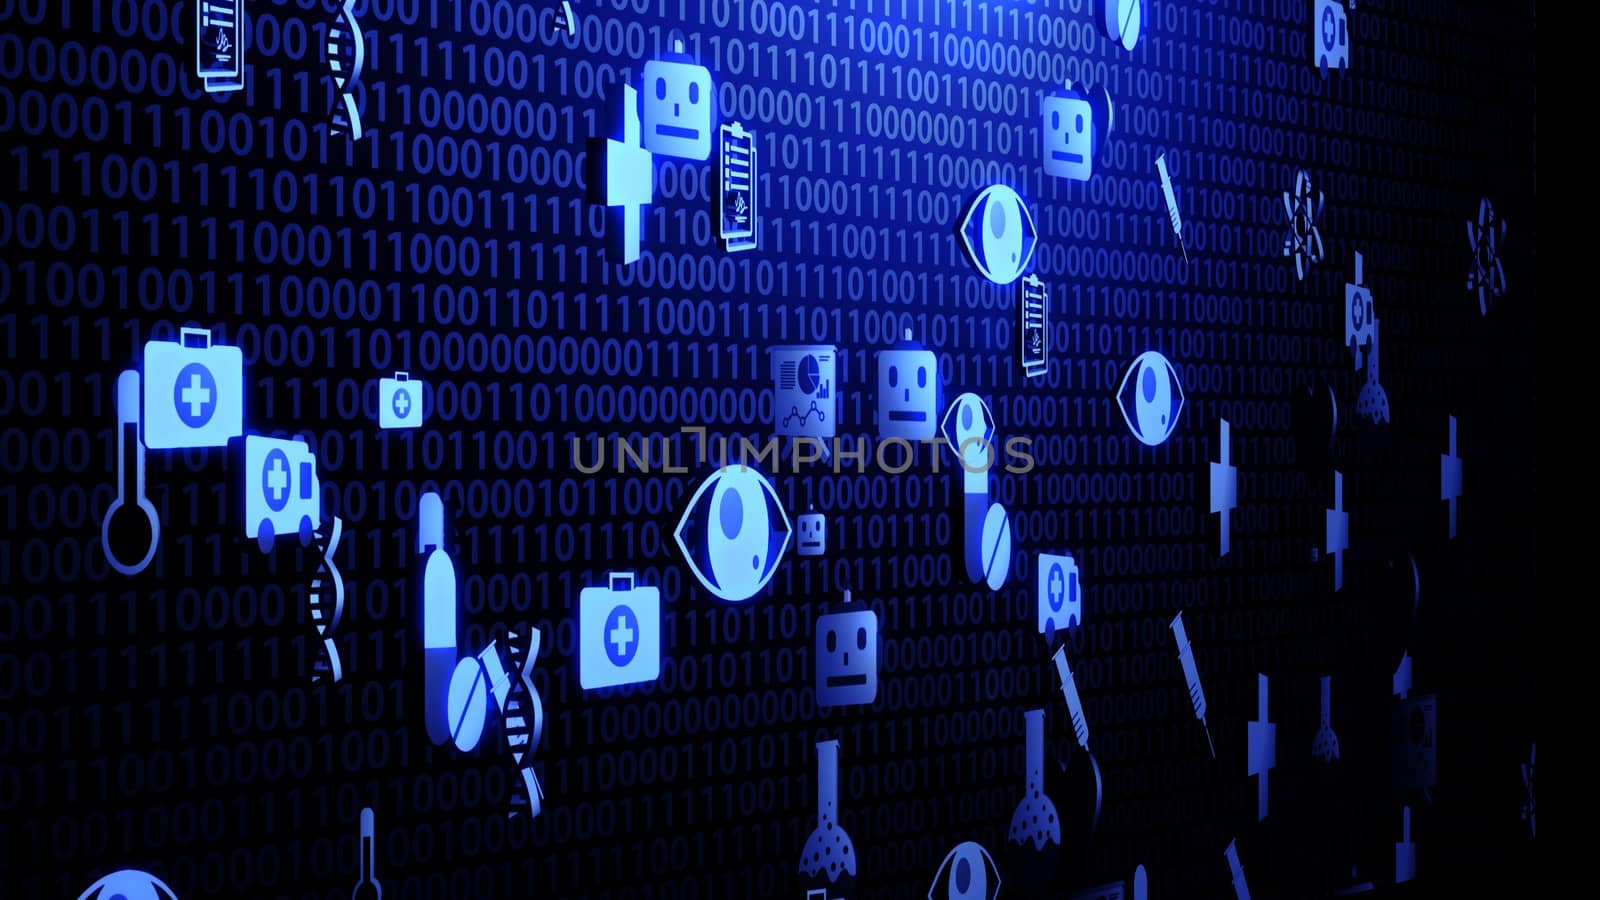 3D Medical Technology Icon Set Hovering on The Random Binary Code Background with Blue Lighting Ver.2